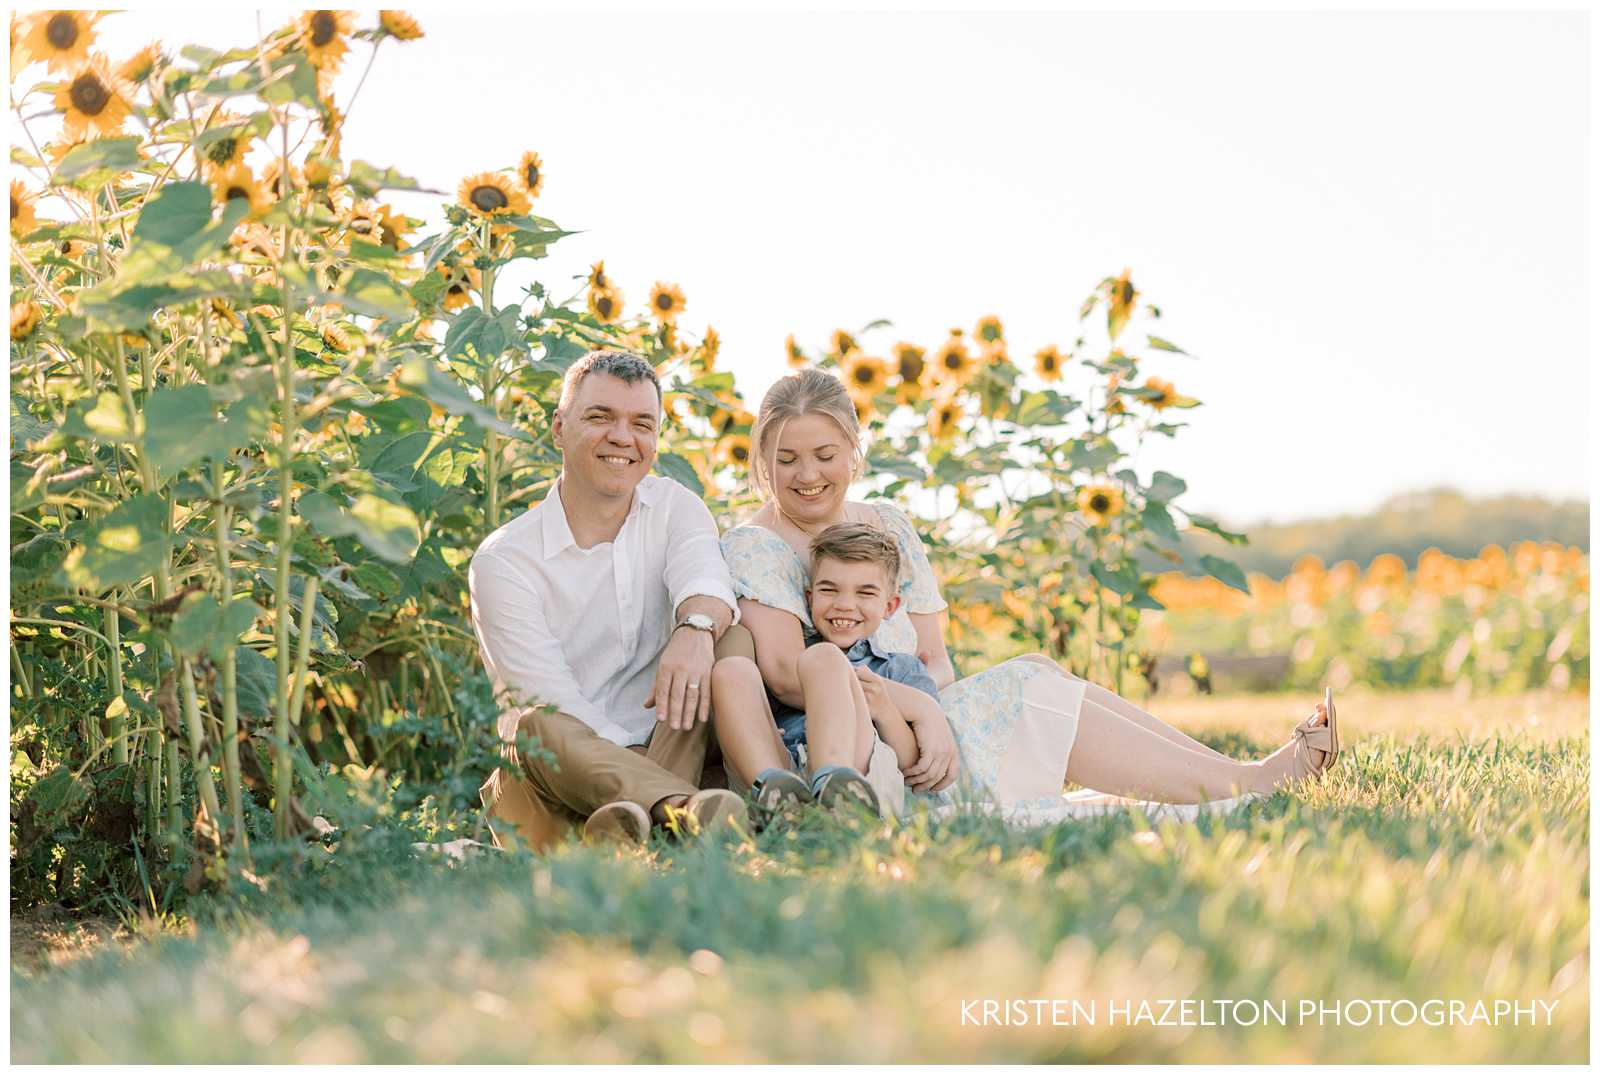 Family photos with sunflowers in Maple Park, IL; family of three sitting in a sunflower field